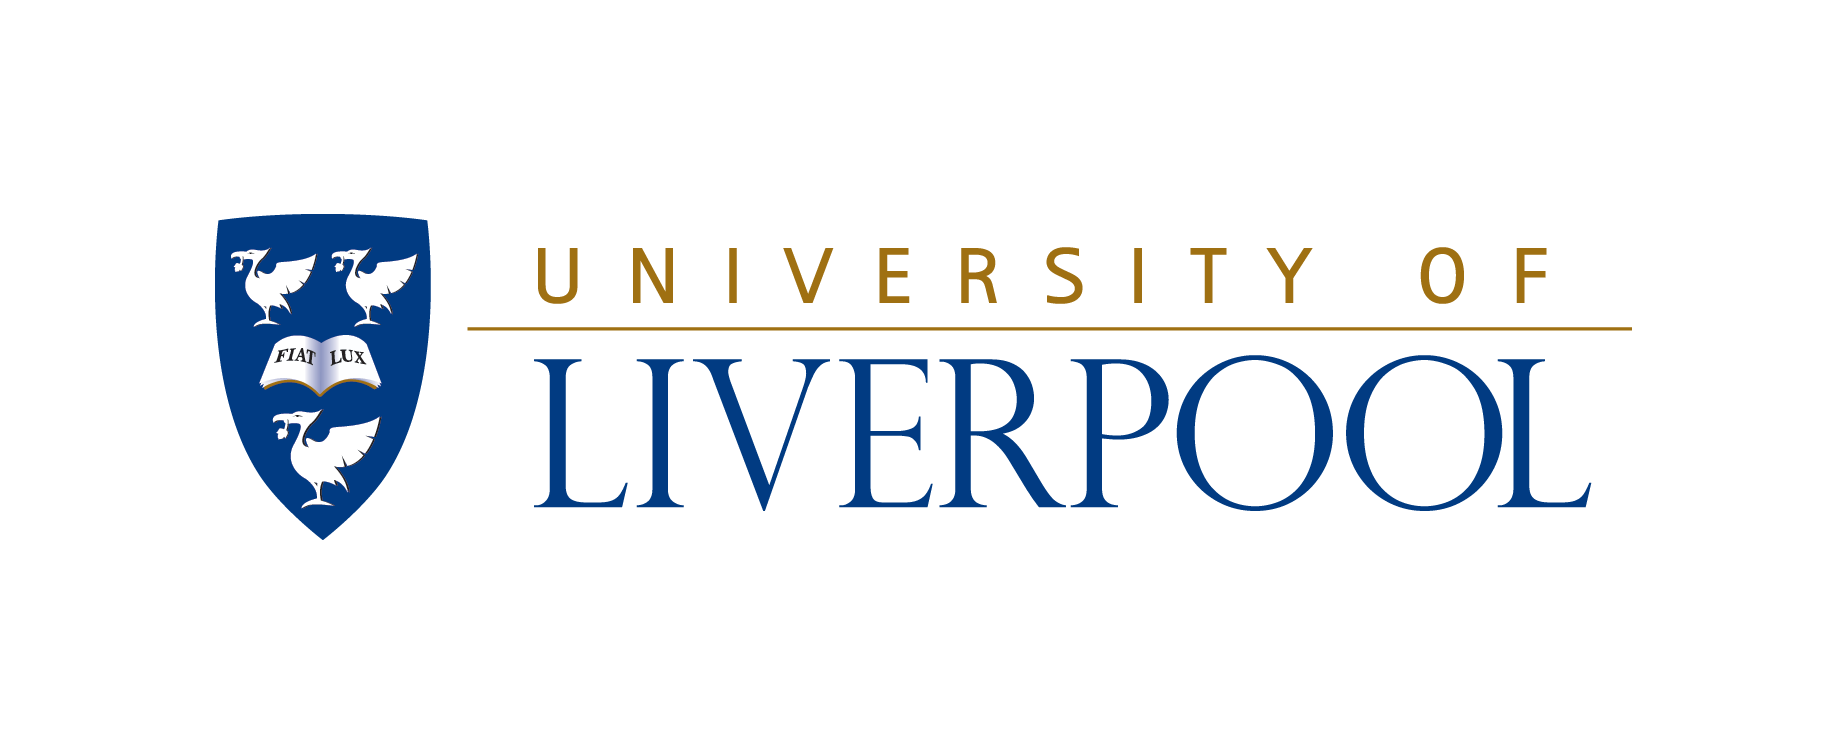 university-of-liverpool-banner.png